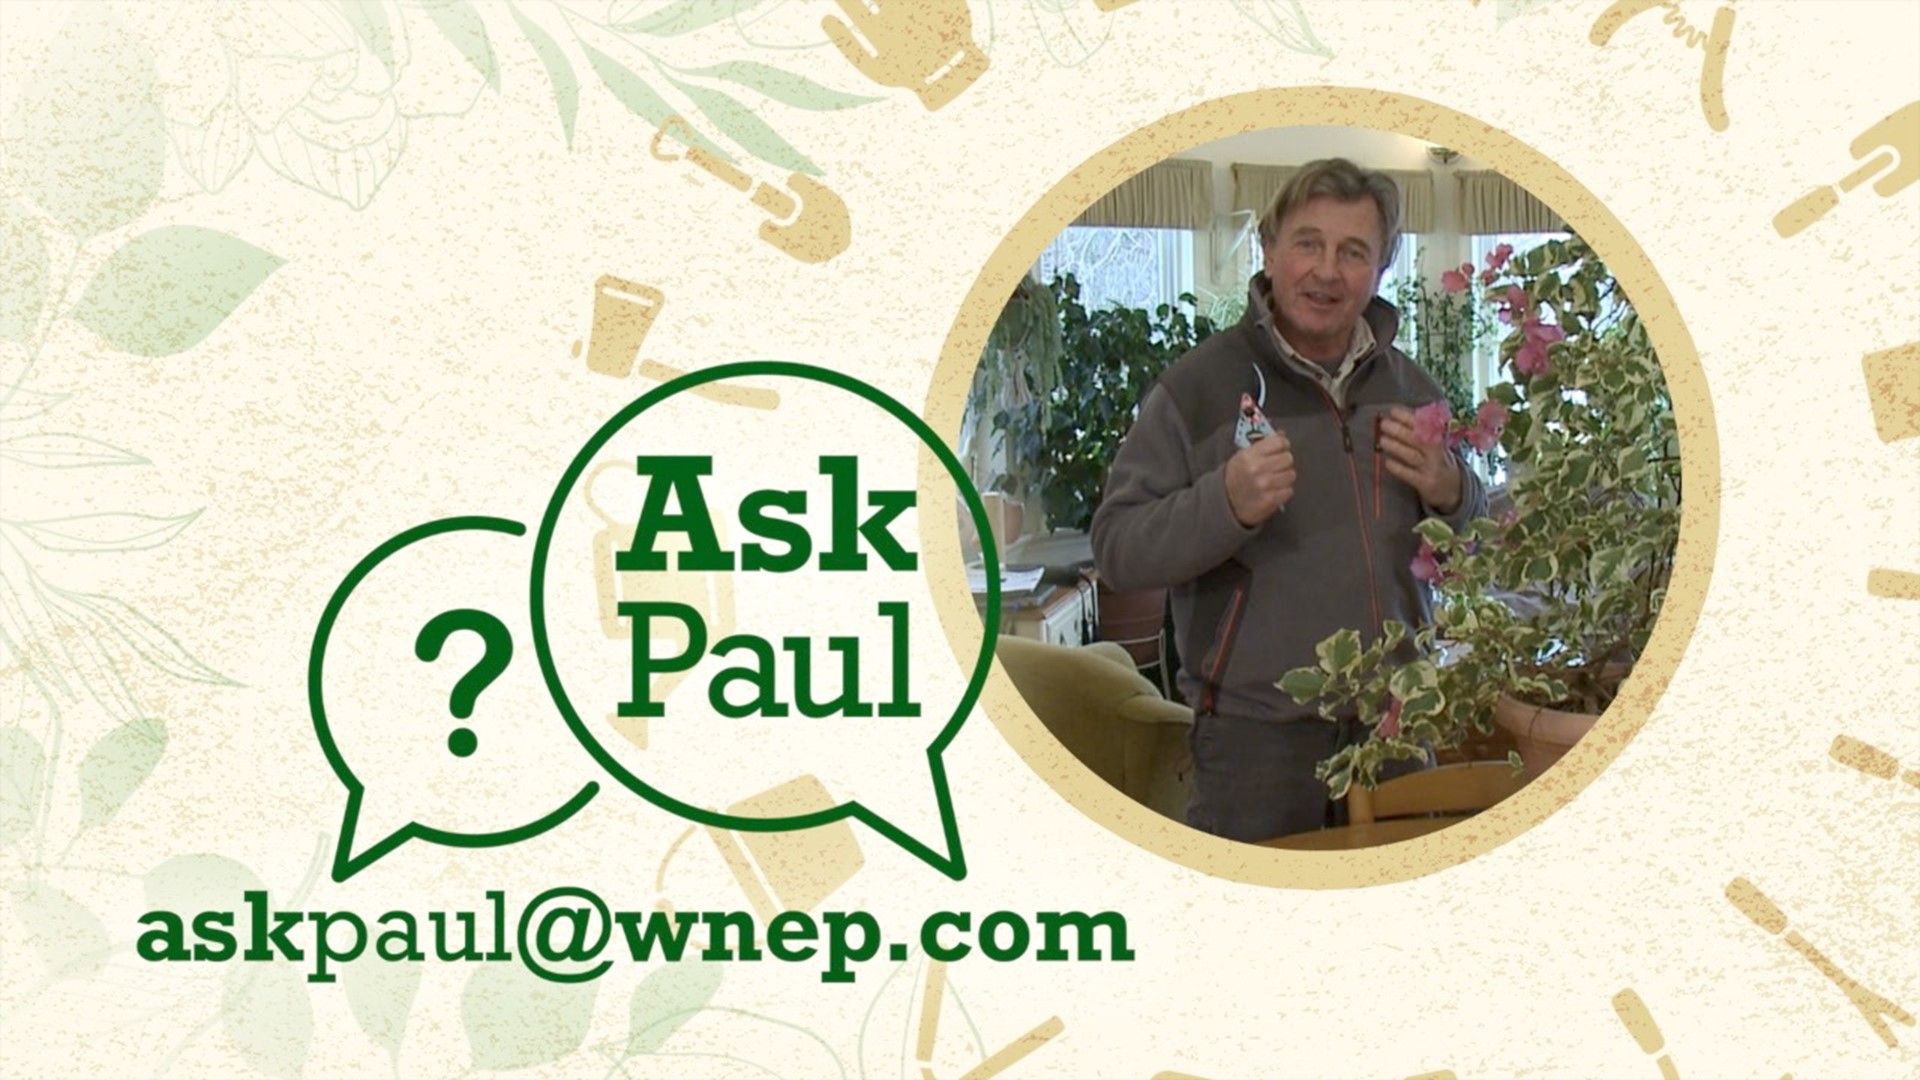 Ask Paul - Answers To Your Plant And Garden Questions